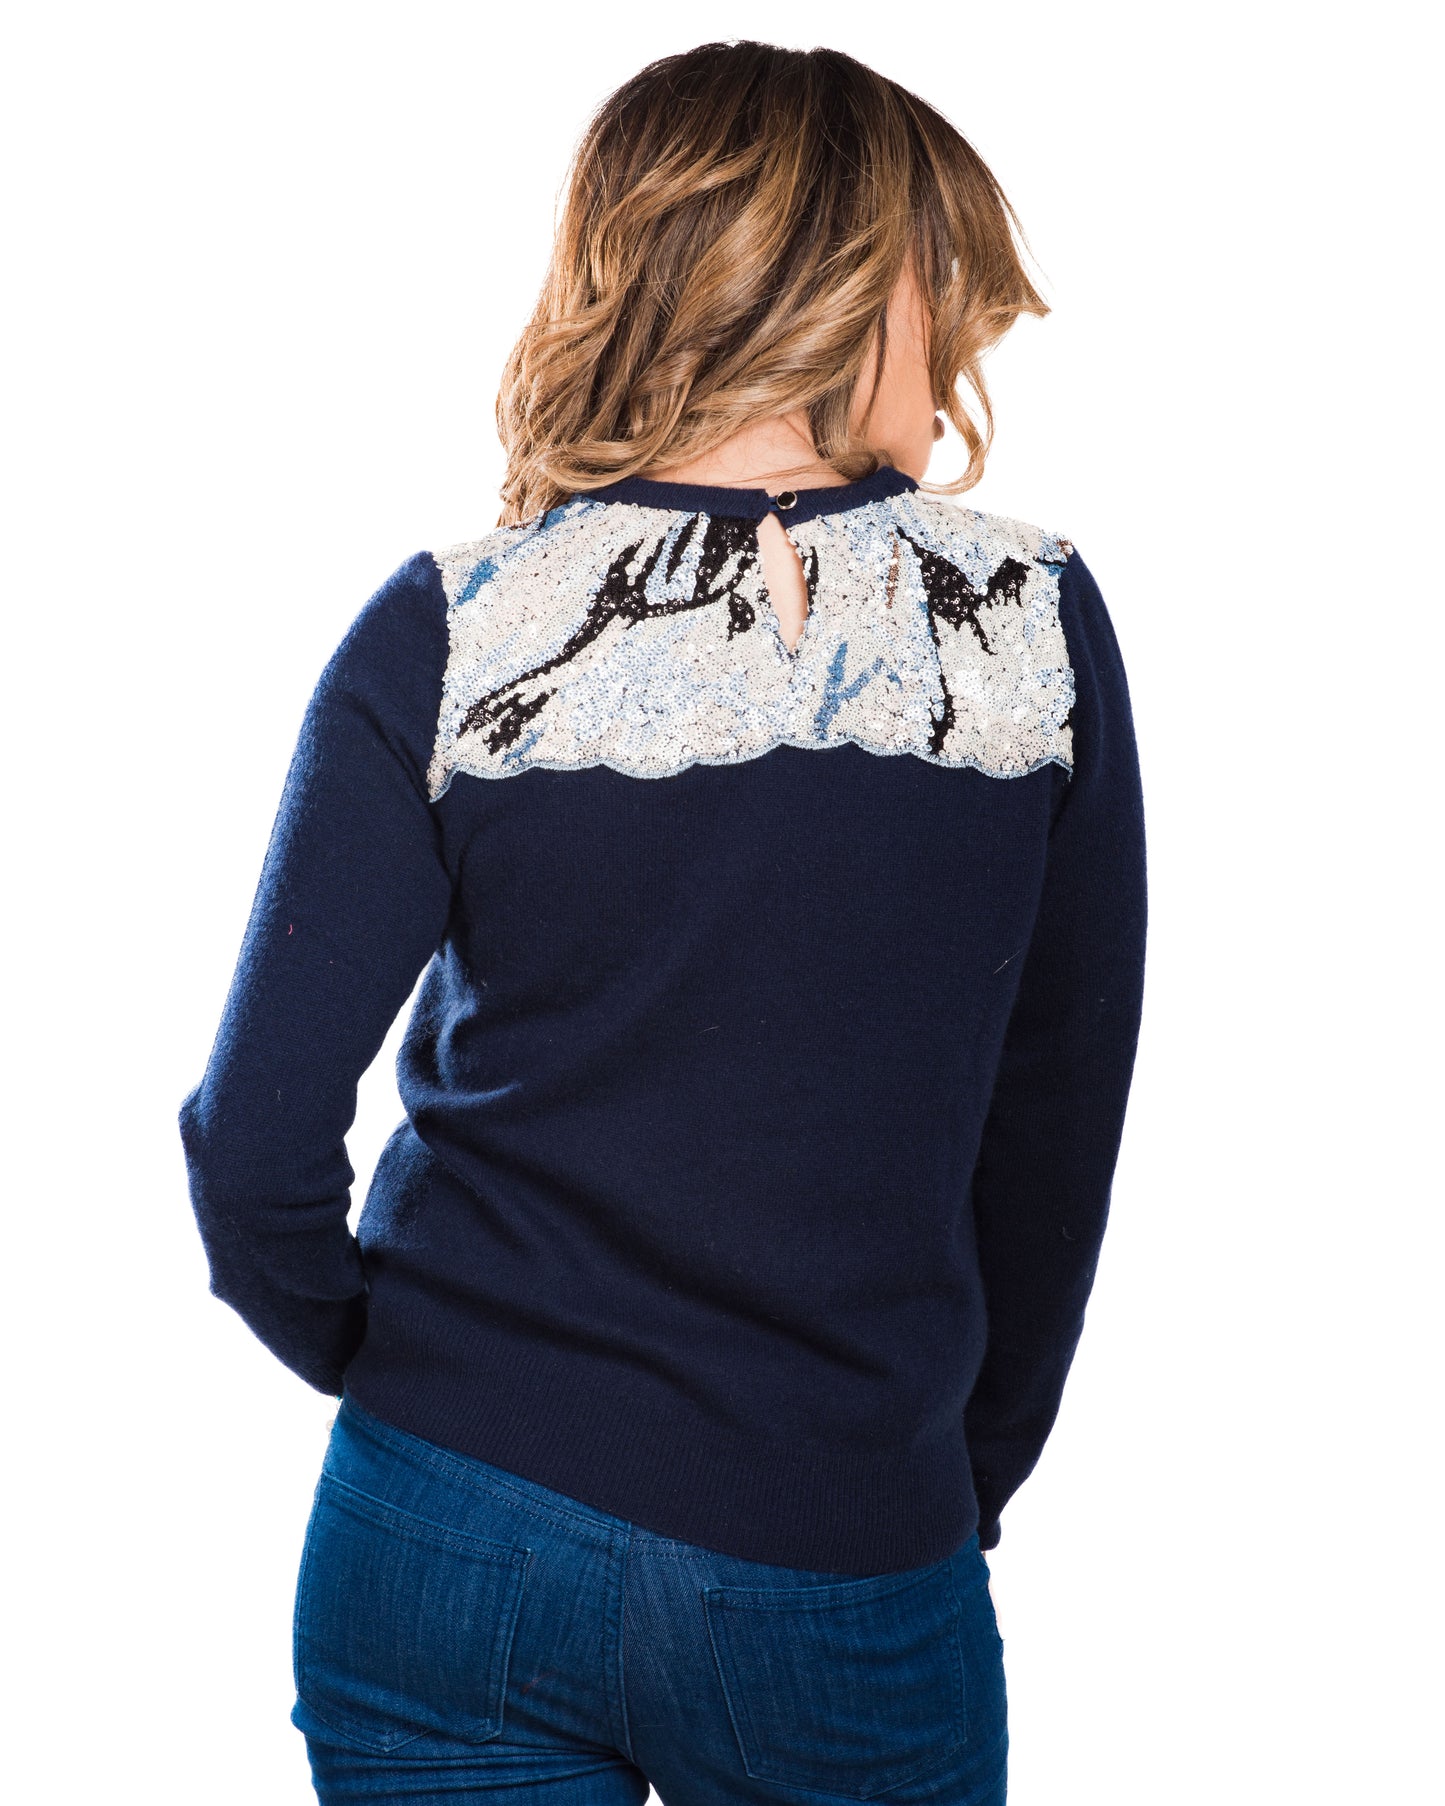 MEDIUM NAVY LONG SLEEVE CREW NECK CASHMERE SWEATER WITH FRONT AND BACK PEEKABOO DETAIL OF NAVY AND WHITE SEQUIN CAMO